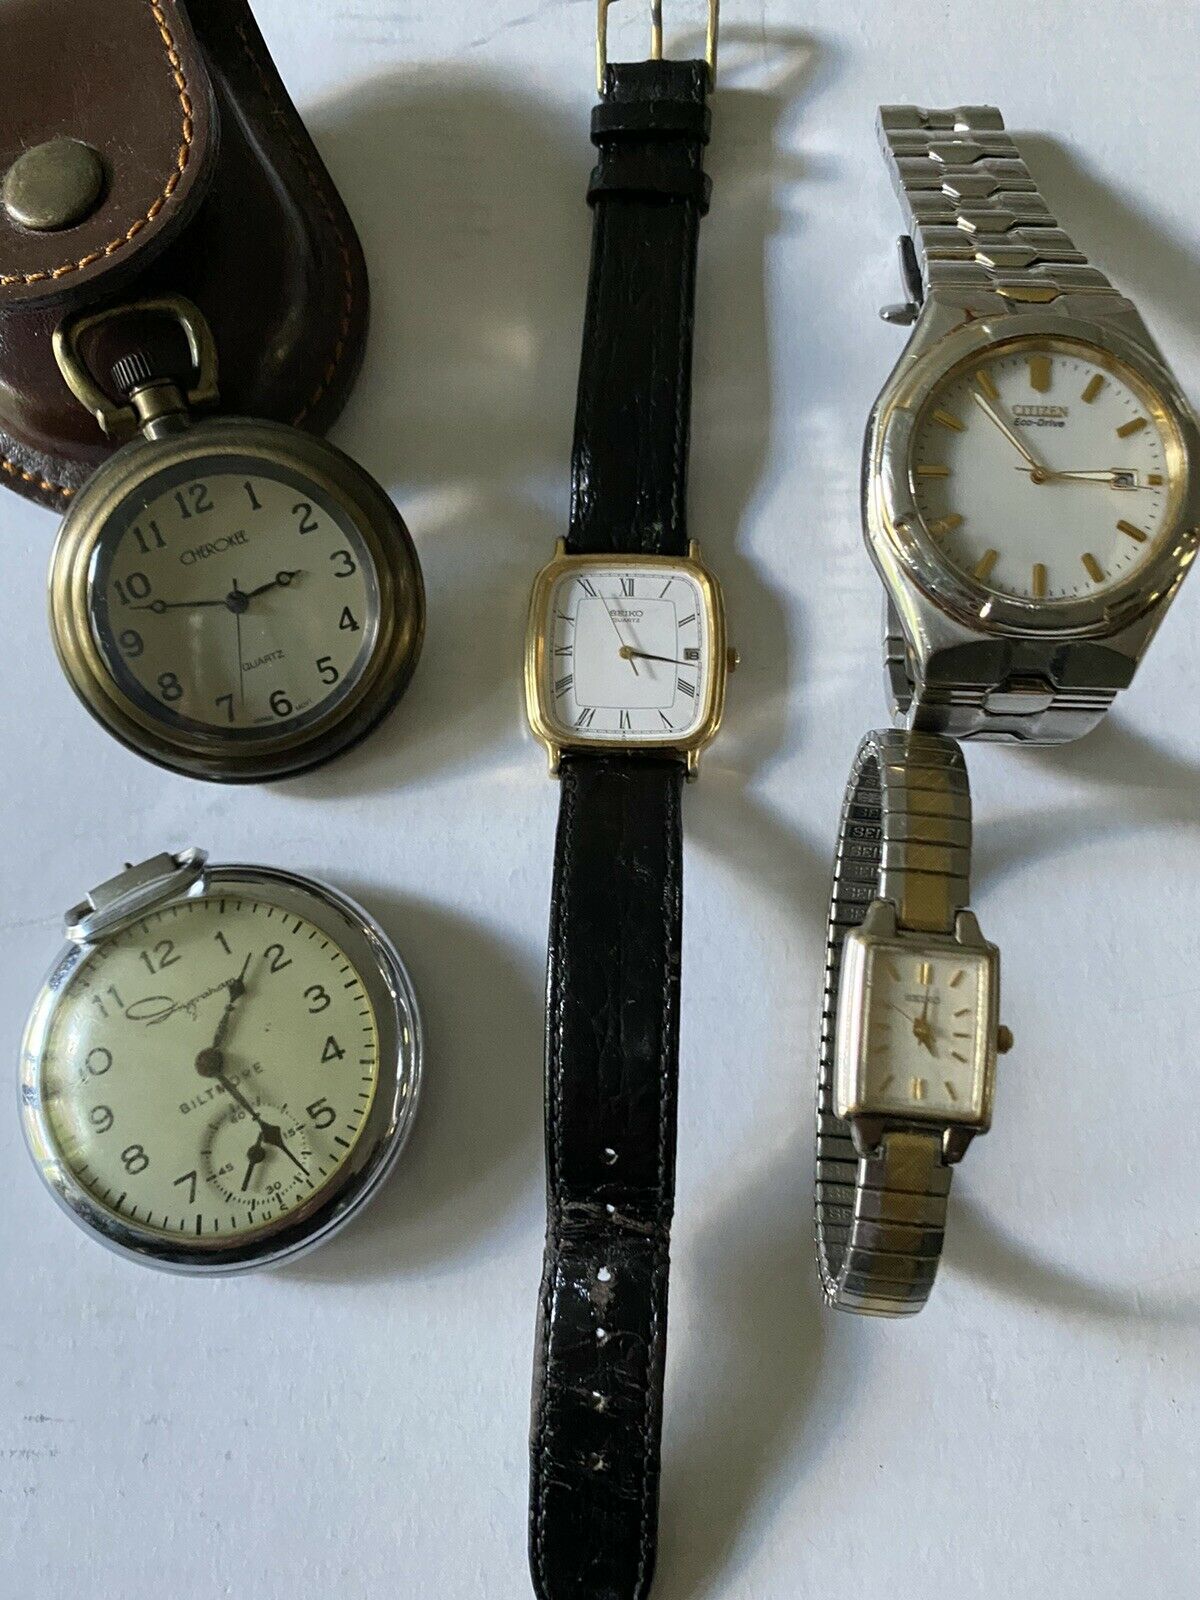 Watches  Lot Of 5 -2 Woman's And 2 Men's For Repair / 1 Seiko Eco-drive